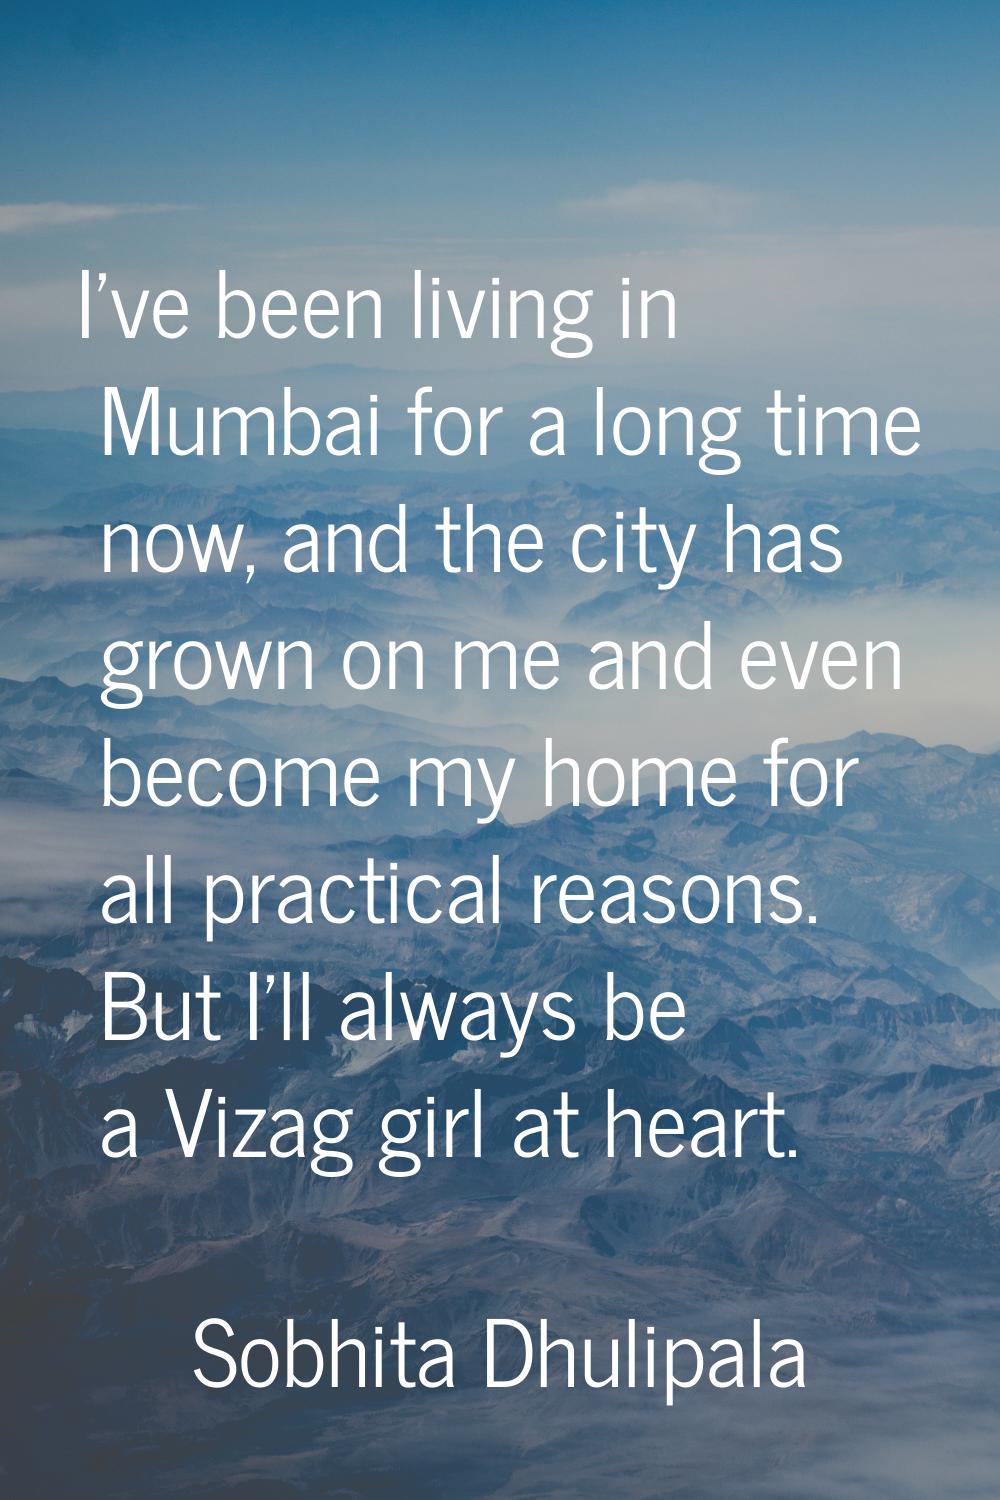 I've been living in Mumbai for a long time now, and the city has grown on me and even become my hom